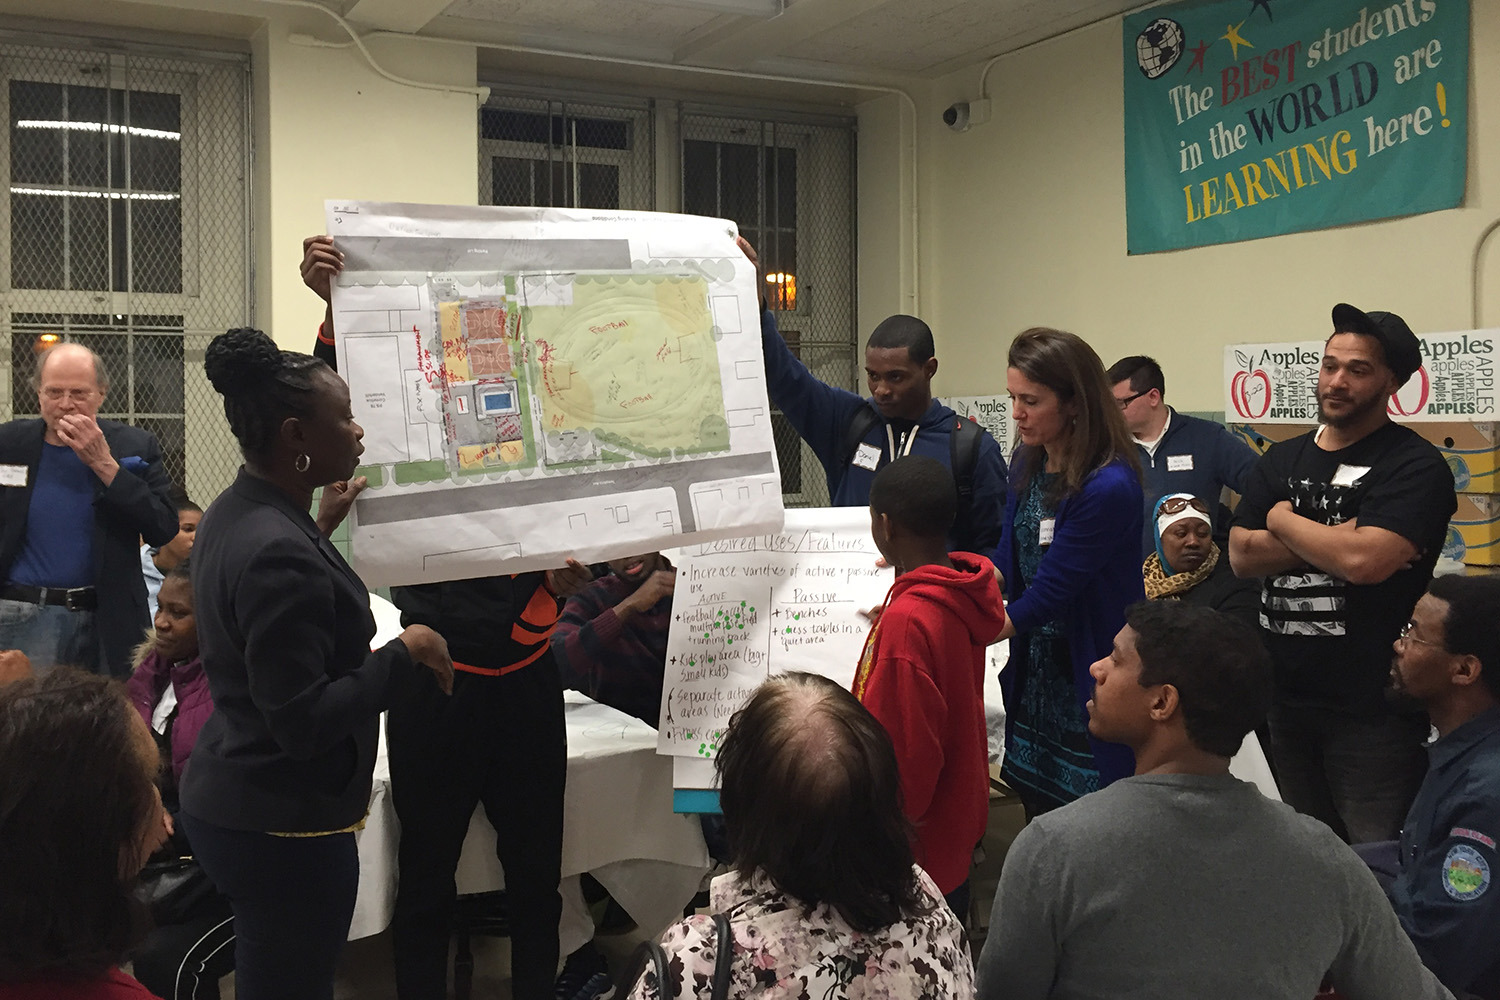 A group of people presents a diagram on a poster to community members